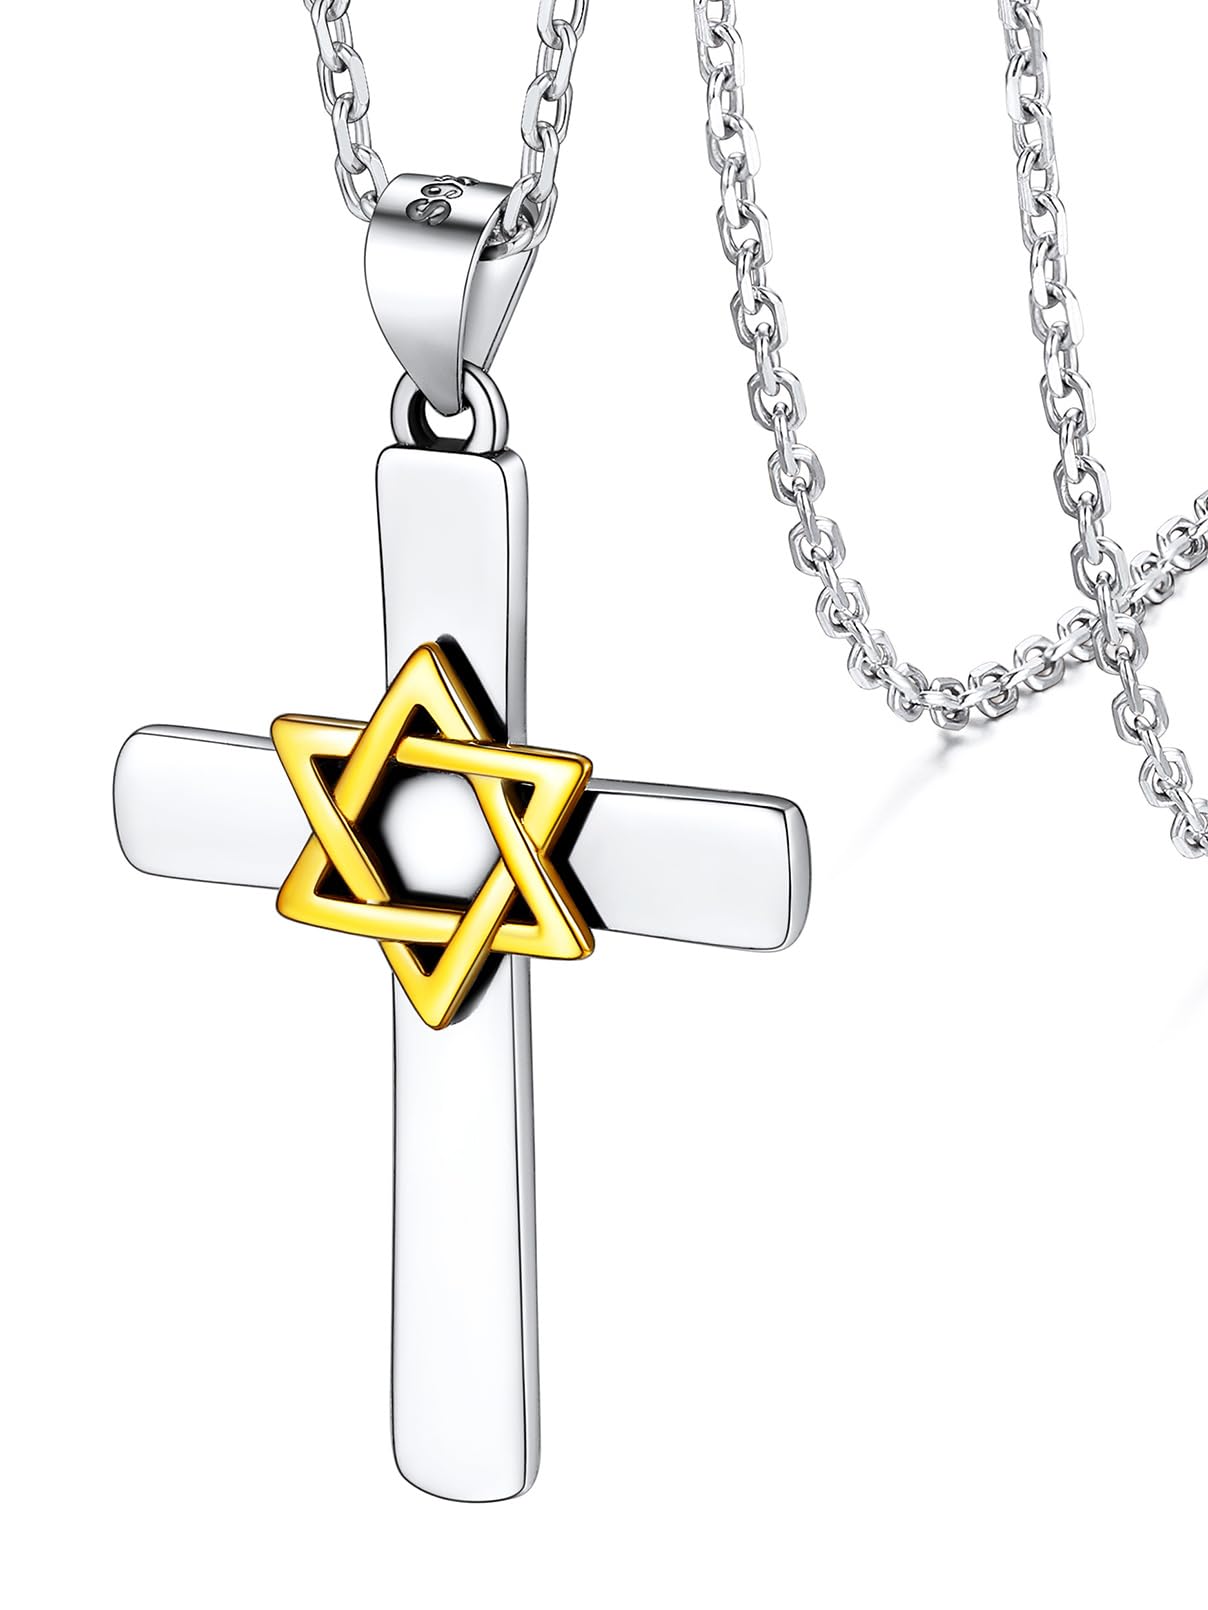 FaithHeart Star of David Jewish Necklace-Sterling Silver Pendant for Women-The Seal of Solomon Talisman Tantrism Hexagram Jewelry for Men